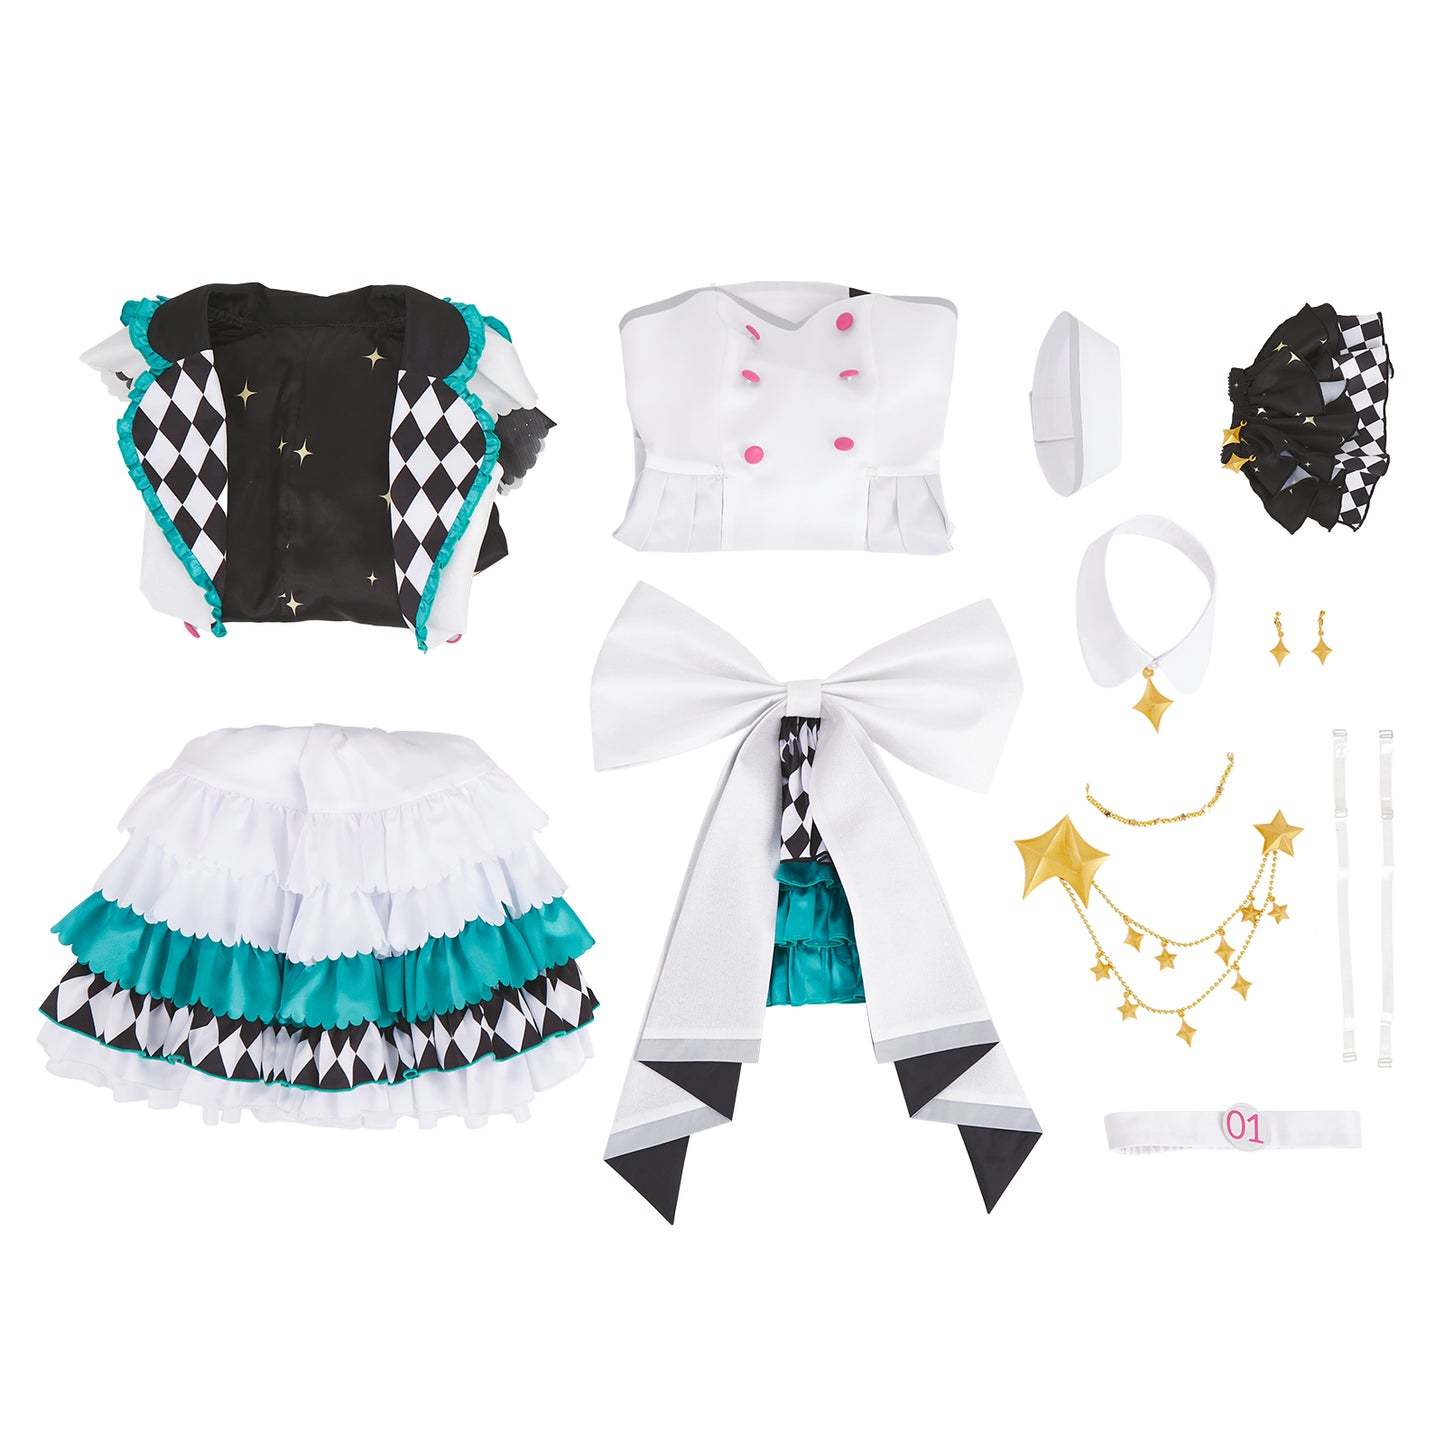 Project Sekai Colorful Stage MORE MORE JUMP Costume Miku Cosplay Costume Dress